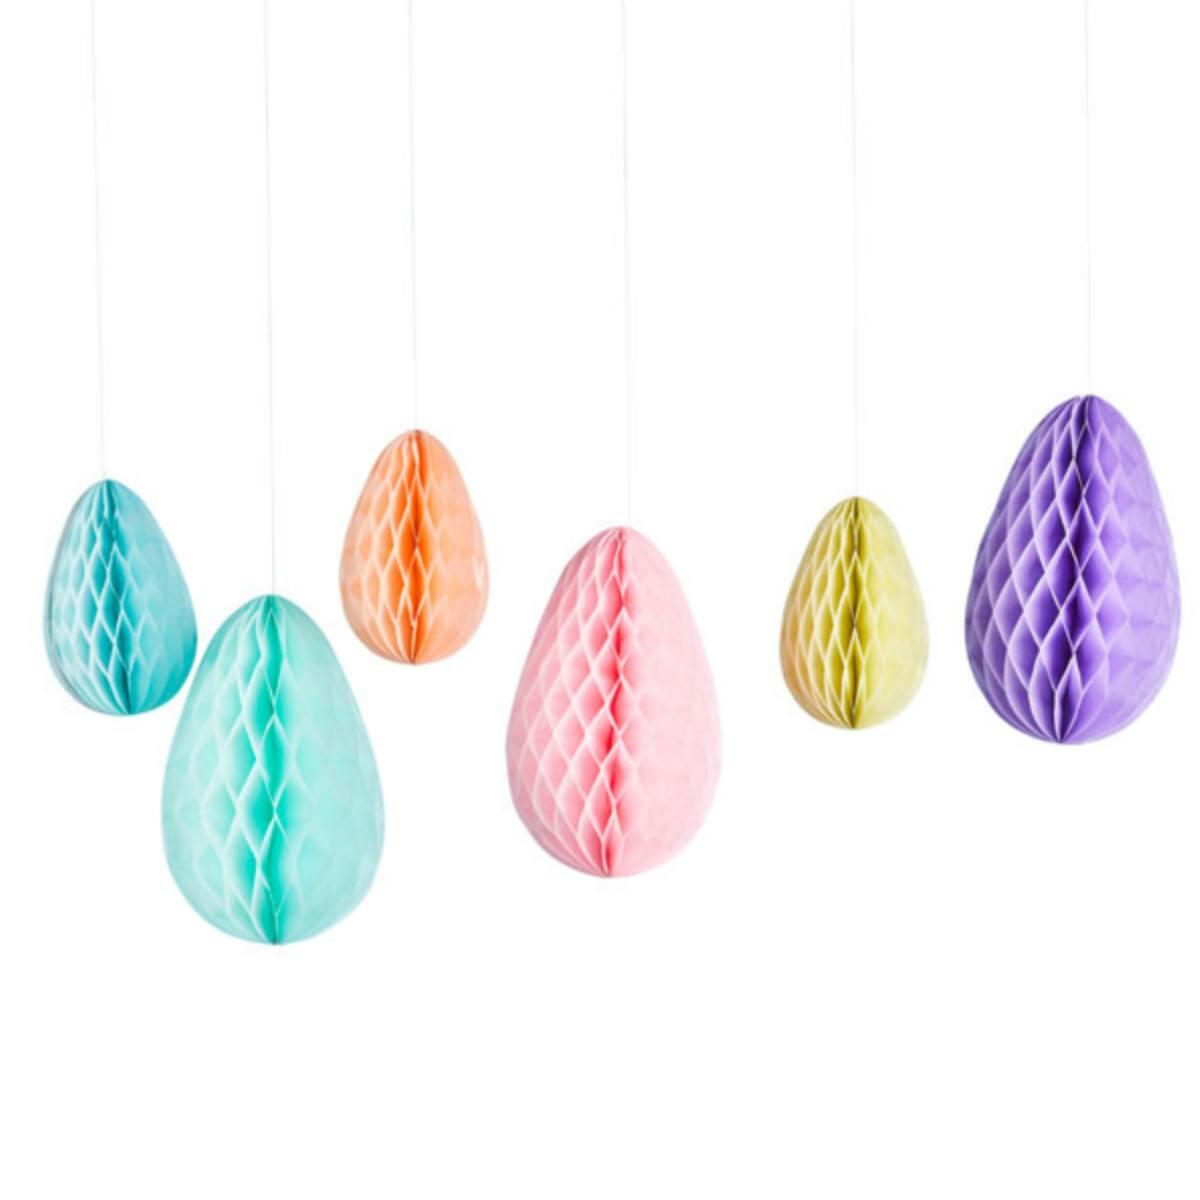 Pastel Coloured Easter Egg Hanging Honeycomb Decorations pk 6 by Club Green HBHE105 available here at Karnival Costumes online party shop